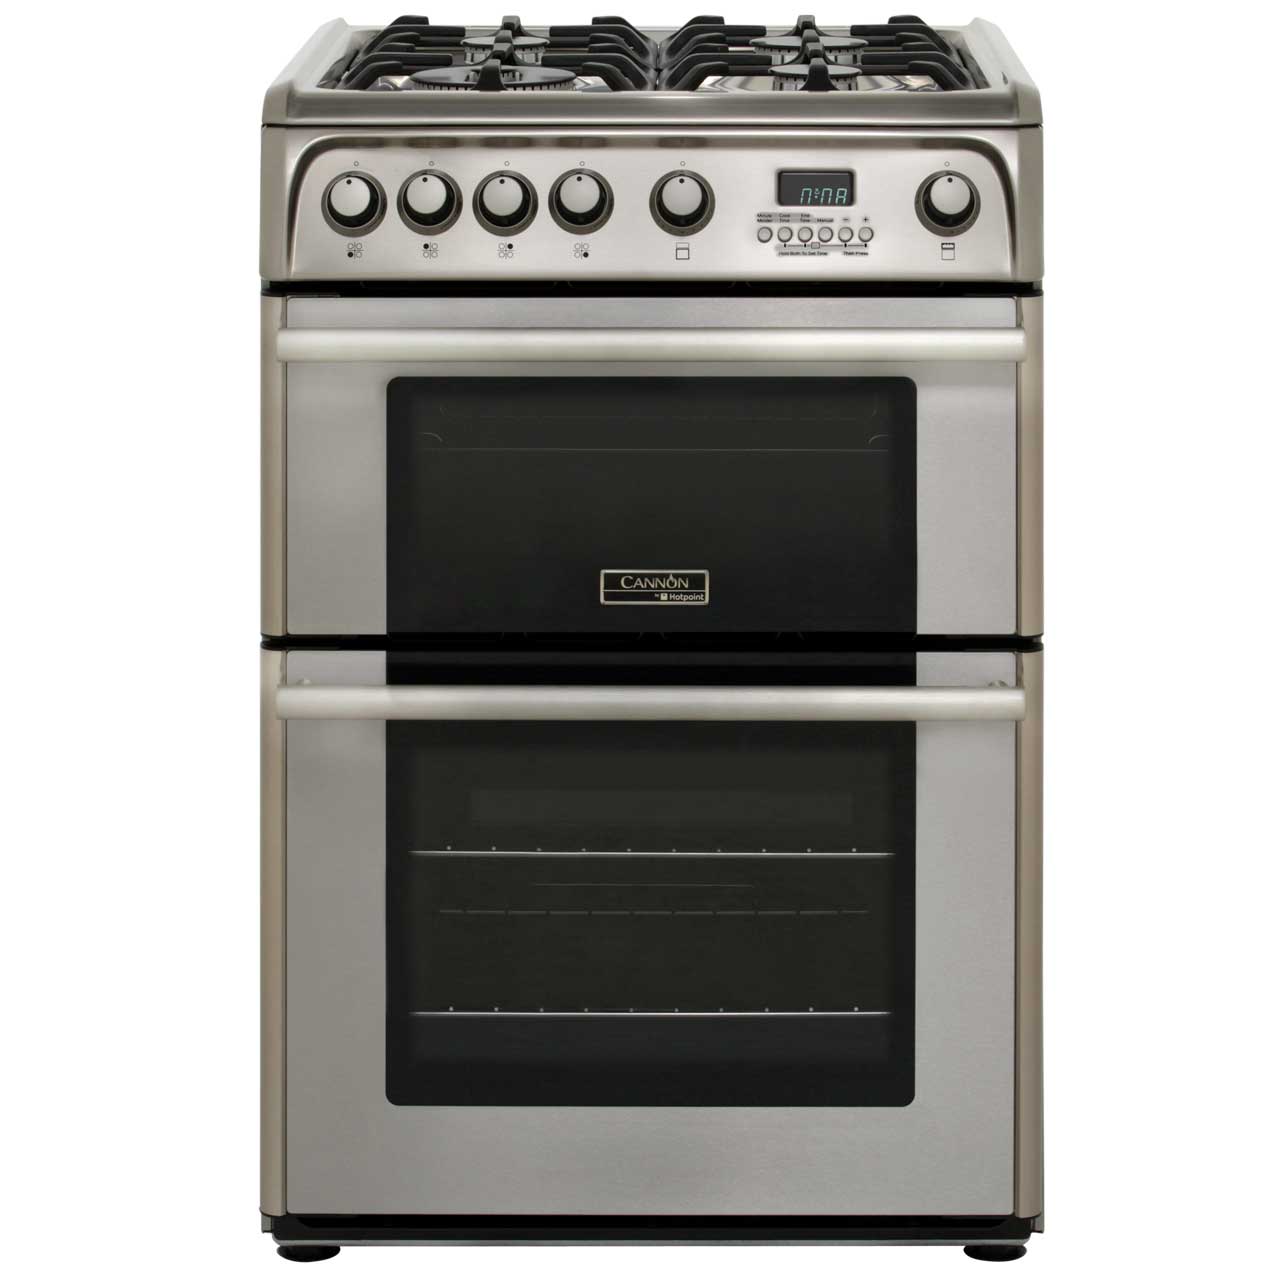 Cannon by Hotpoint CH60GPXF Free Standing Cooker in Stainless Steel